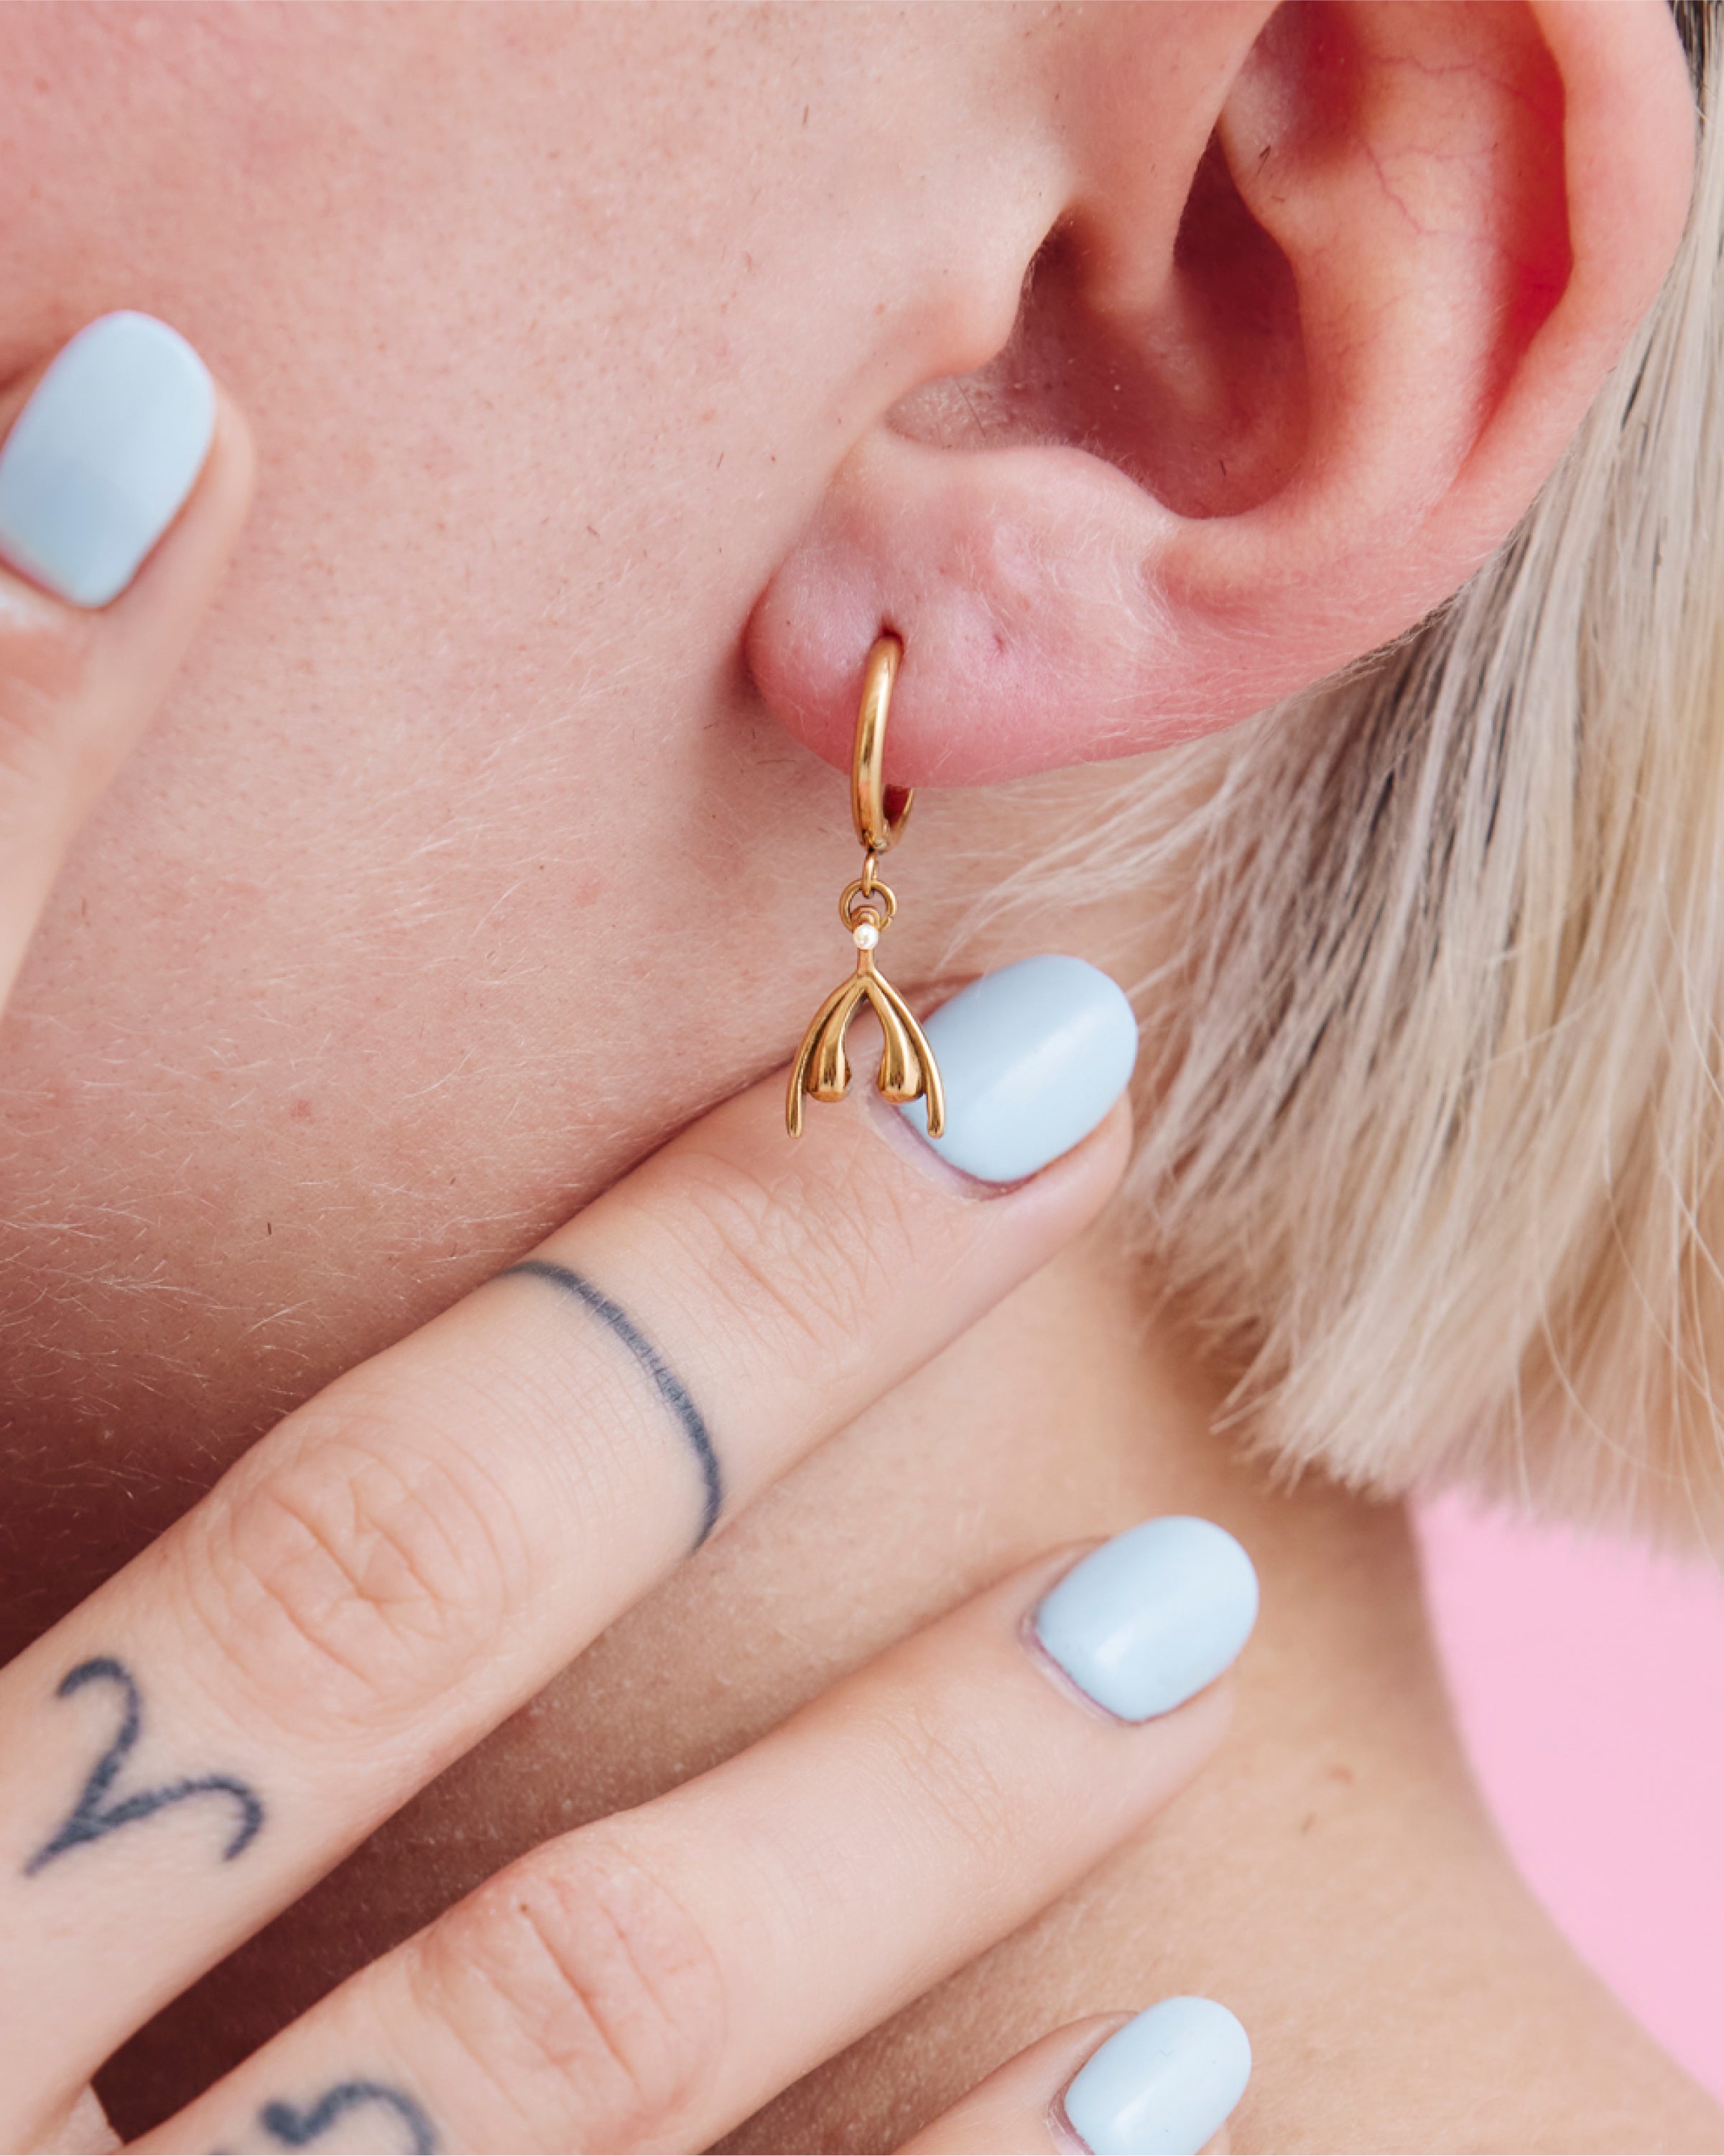 Clit Collection – Earrings